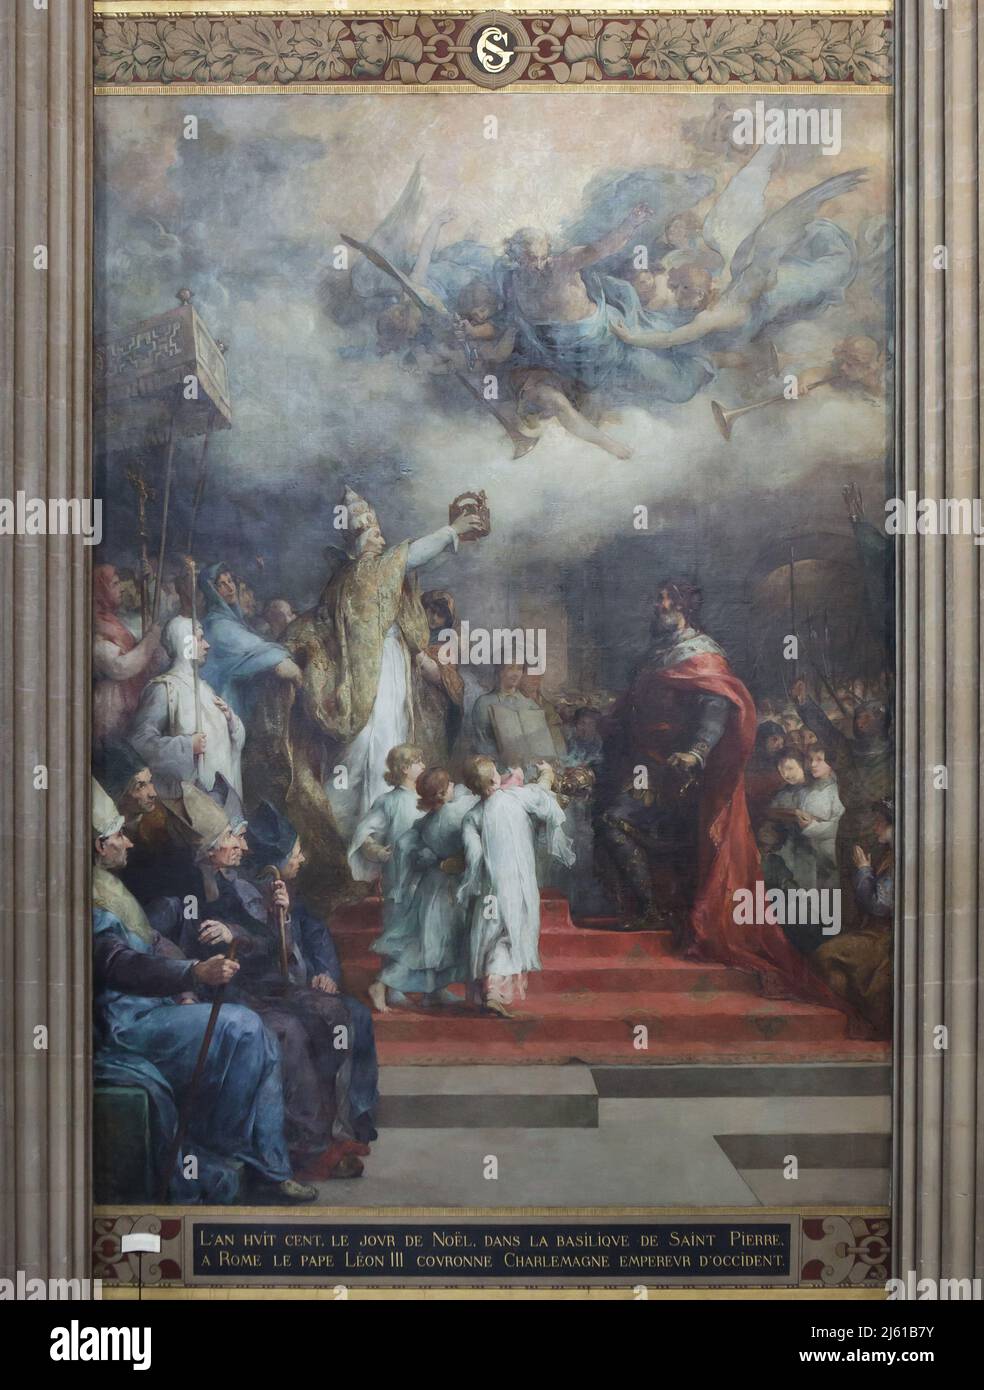 Coronation of Charlemagne depicted in the mural painting by French painter Henri-Léopold Lévy (1874) in the Panthéon in Paris, France. Stock Photo